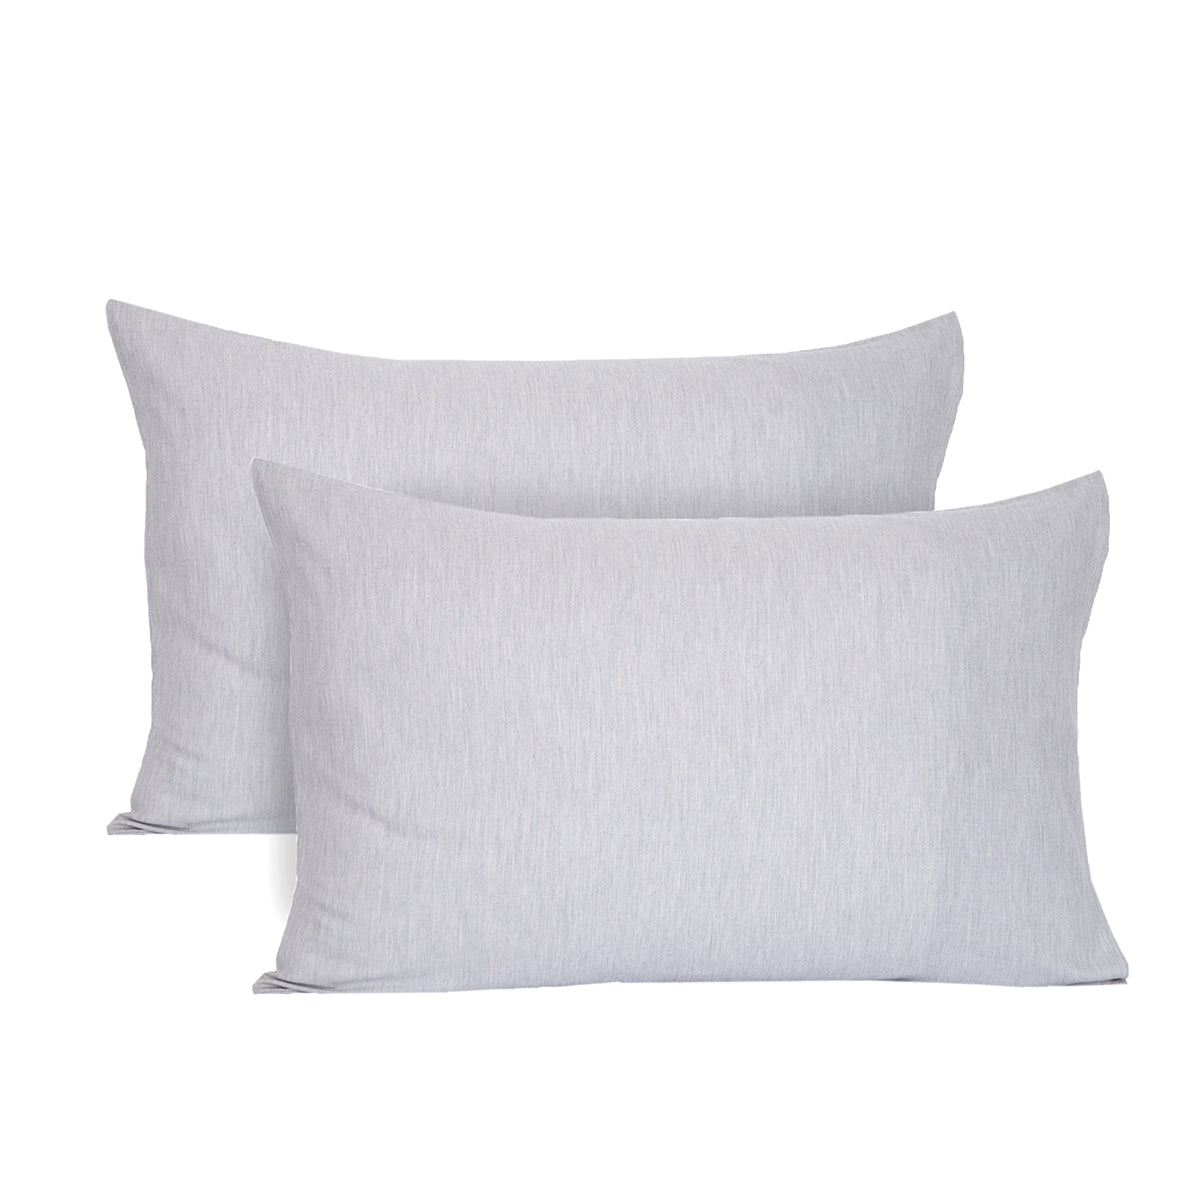 Emmie Made With Egyptian Cotton Woven with Hemm Stitch 2PC Pillow Case Set